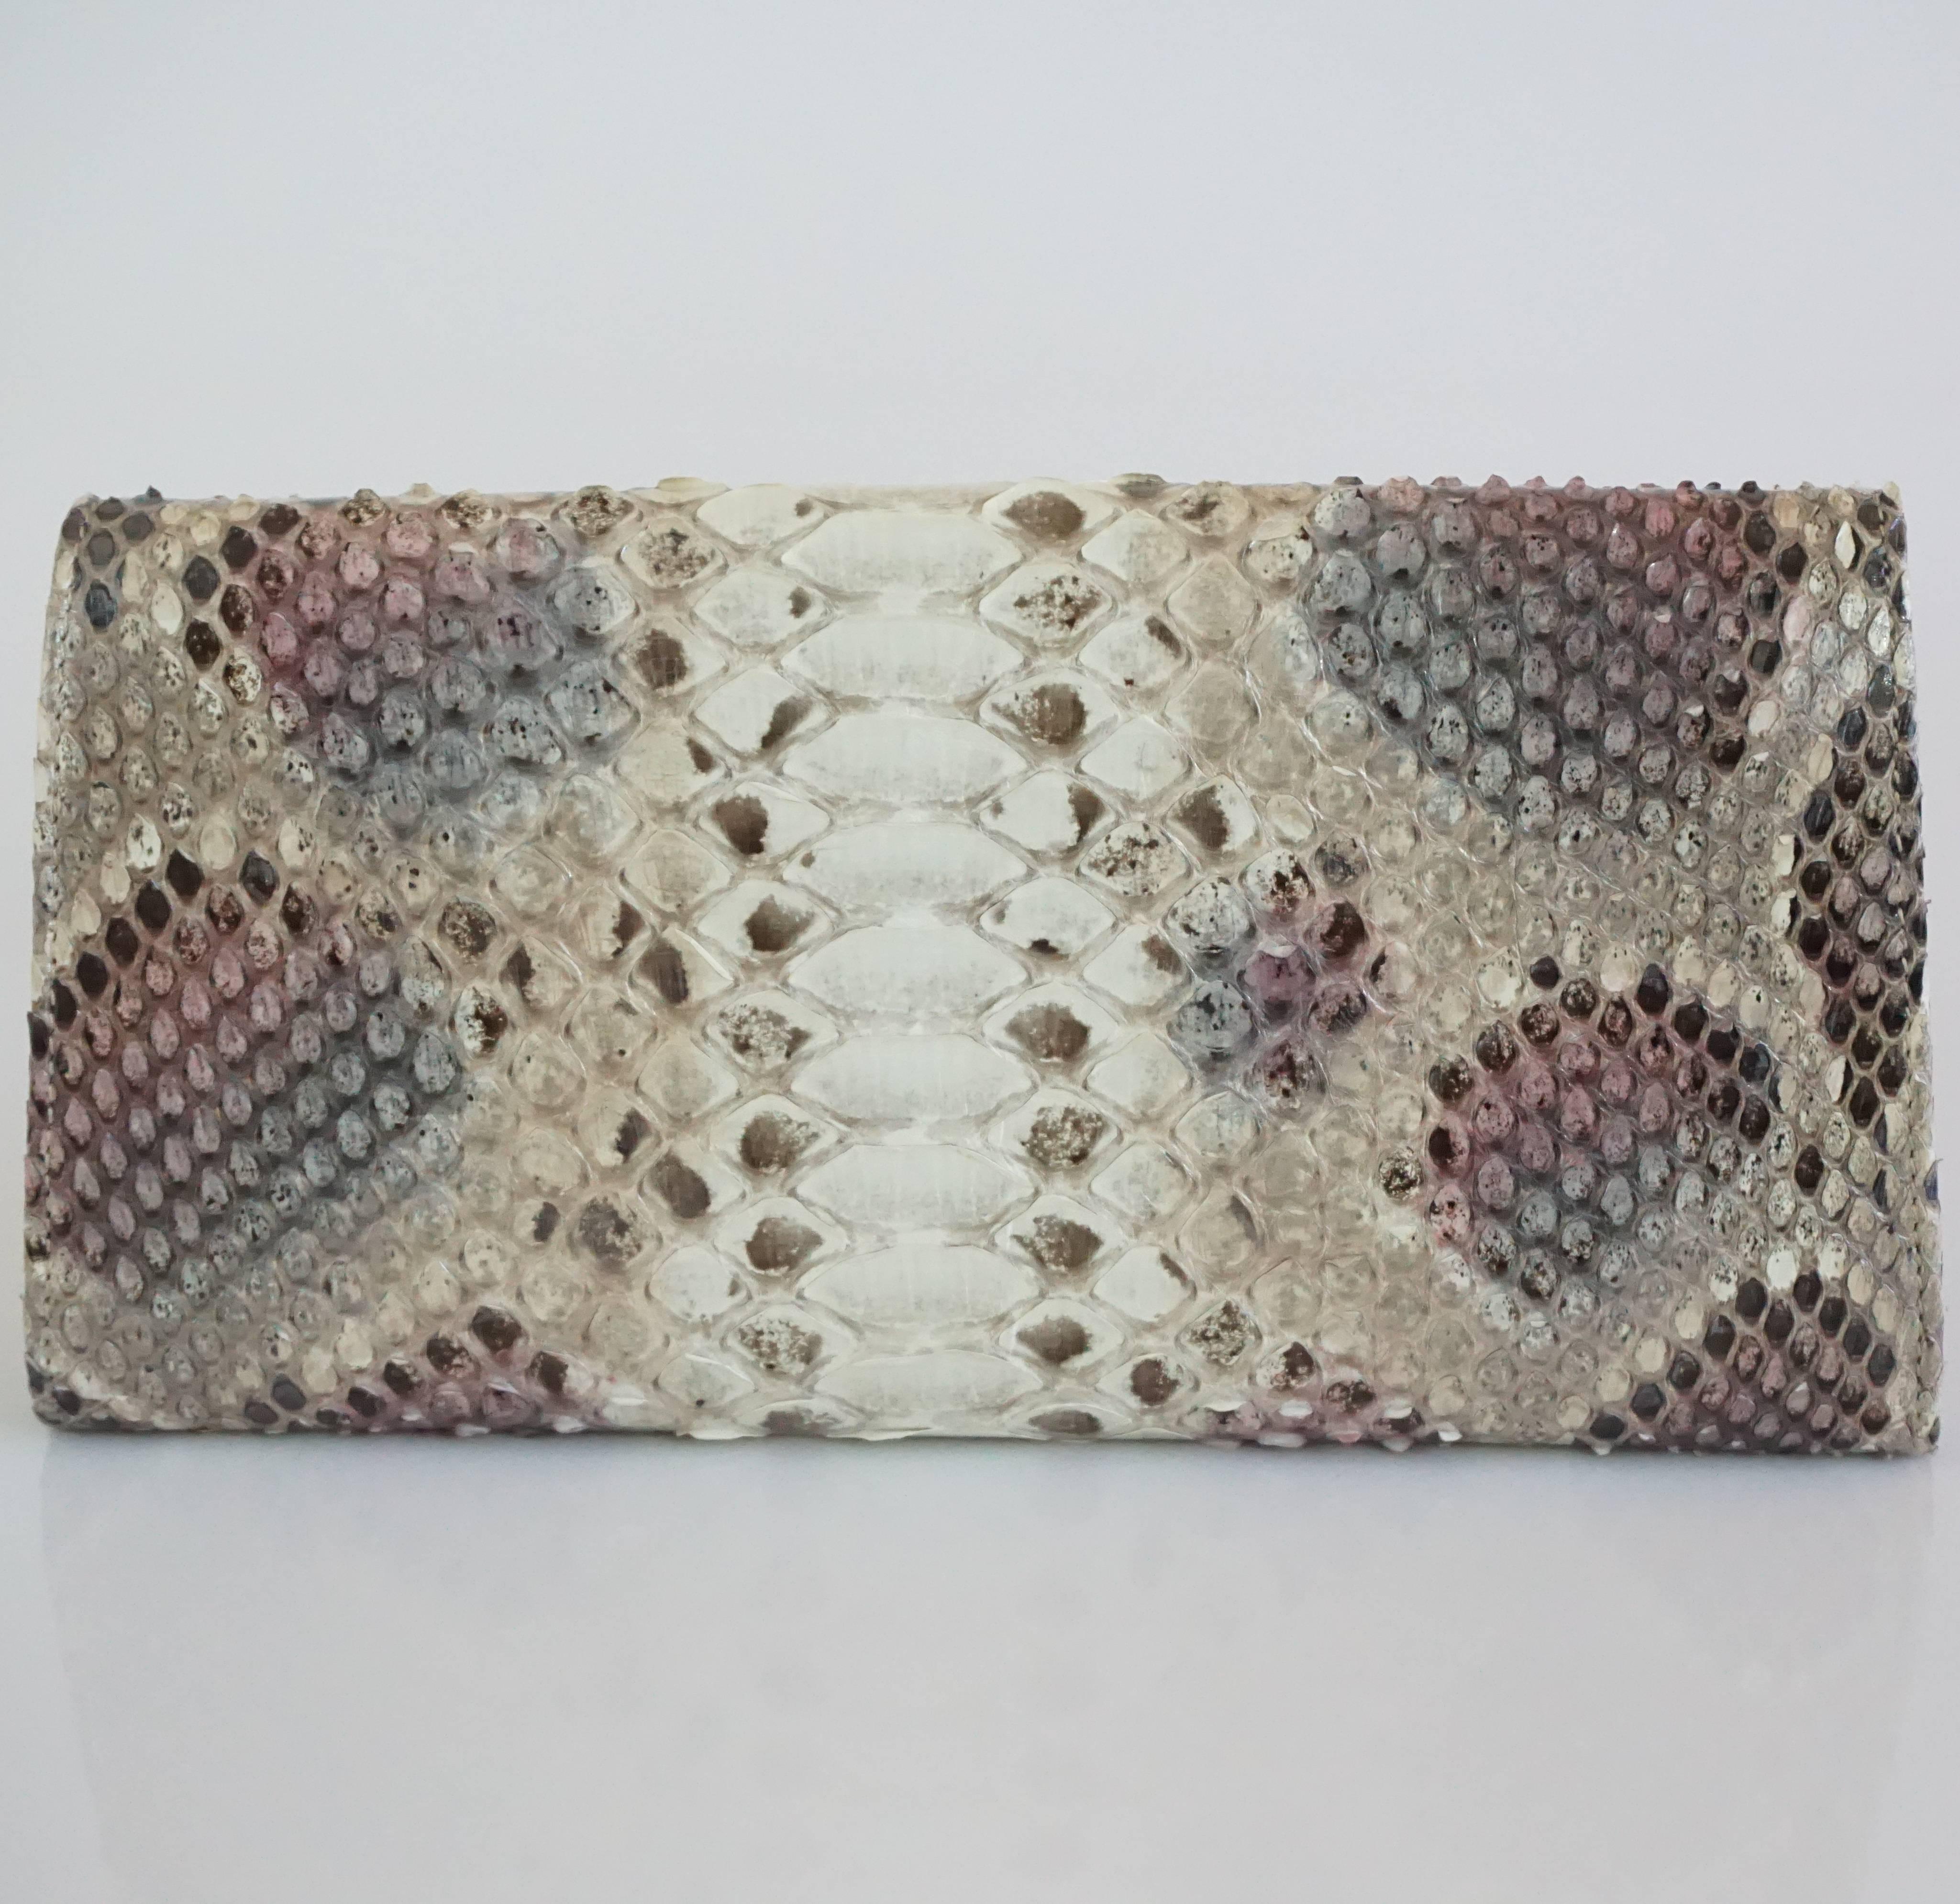 Jimmy Choo Earthtone Python Clutch with Strap - GHW. This clutch is an elegant piece which features a light gold closure with the Jimmy Choo logo, a leather and grosgrain interior, 8 card slots, 1 large zipper compartment, and a strap with chain